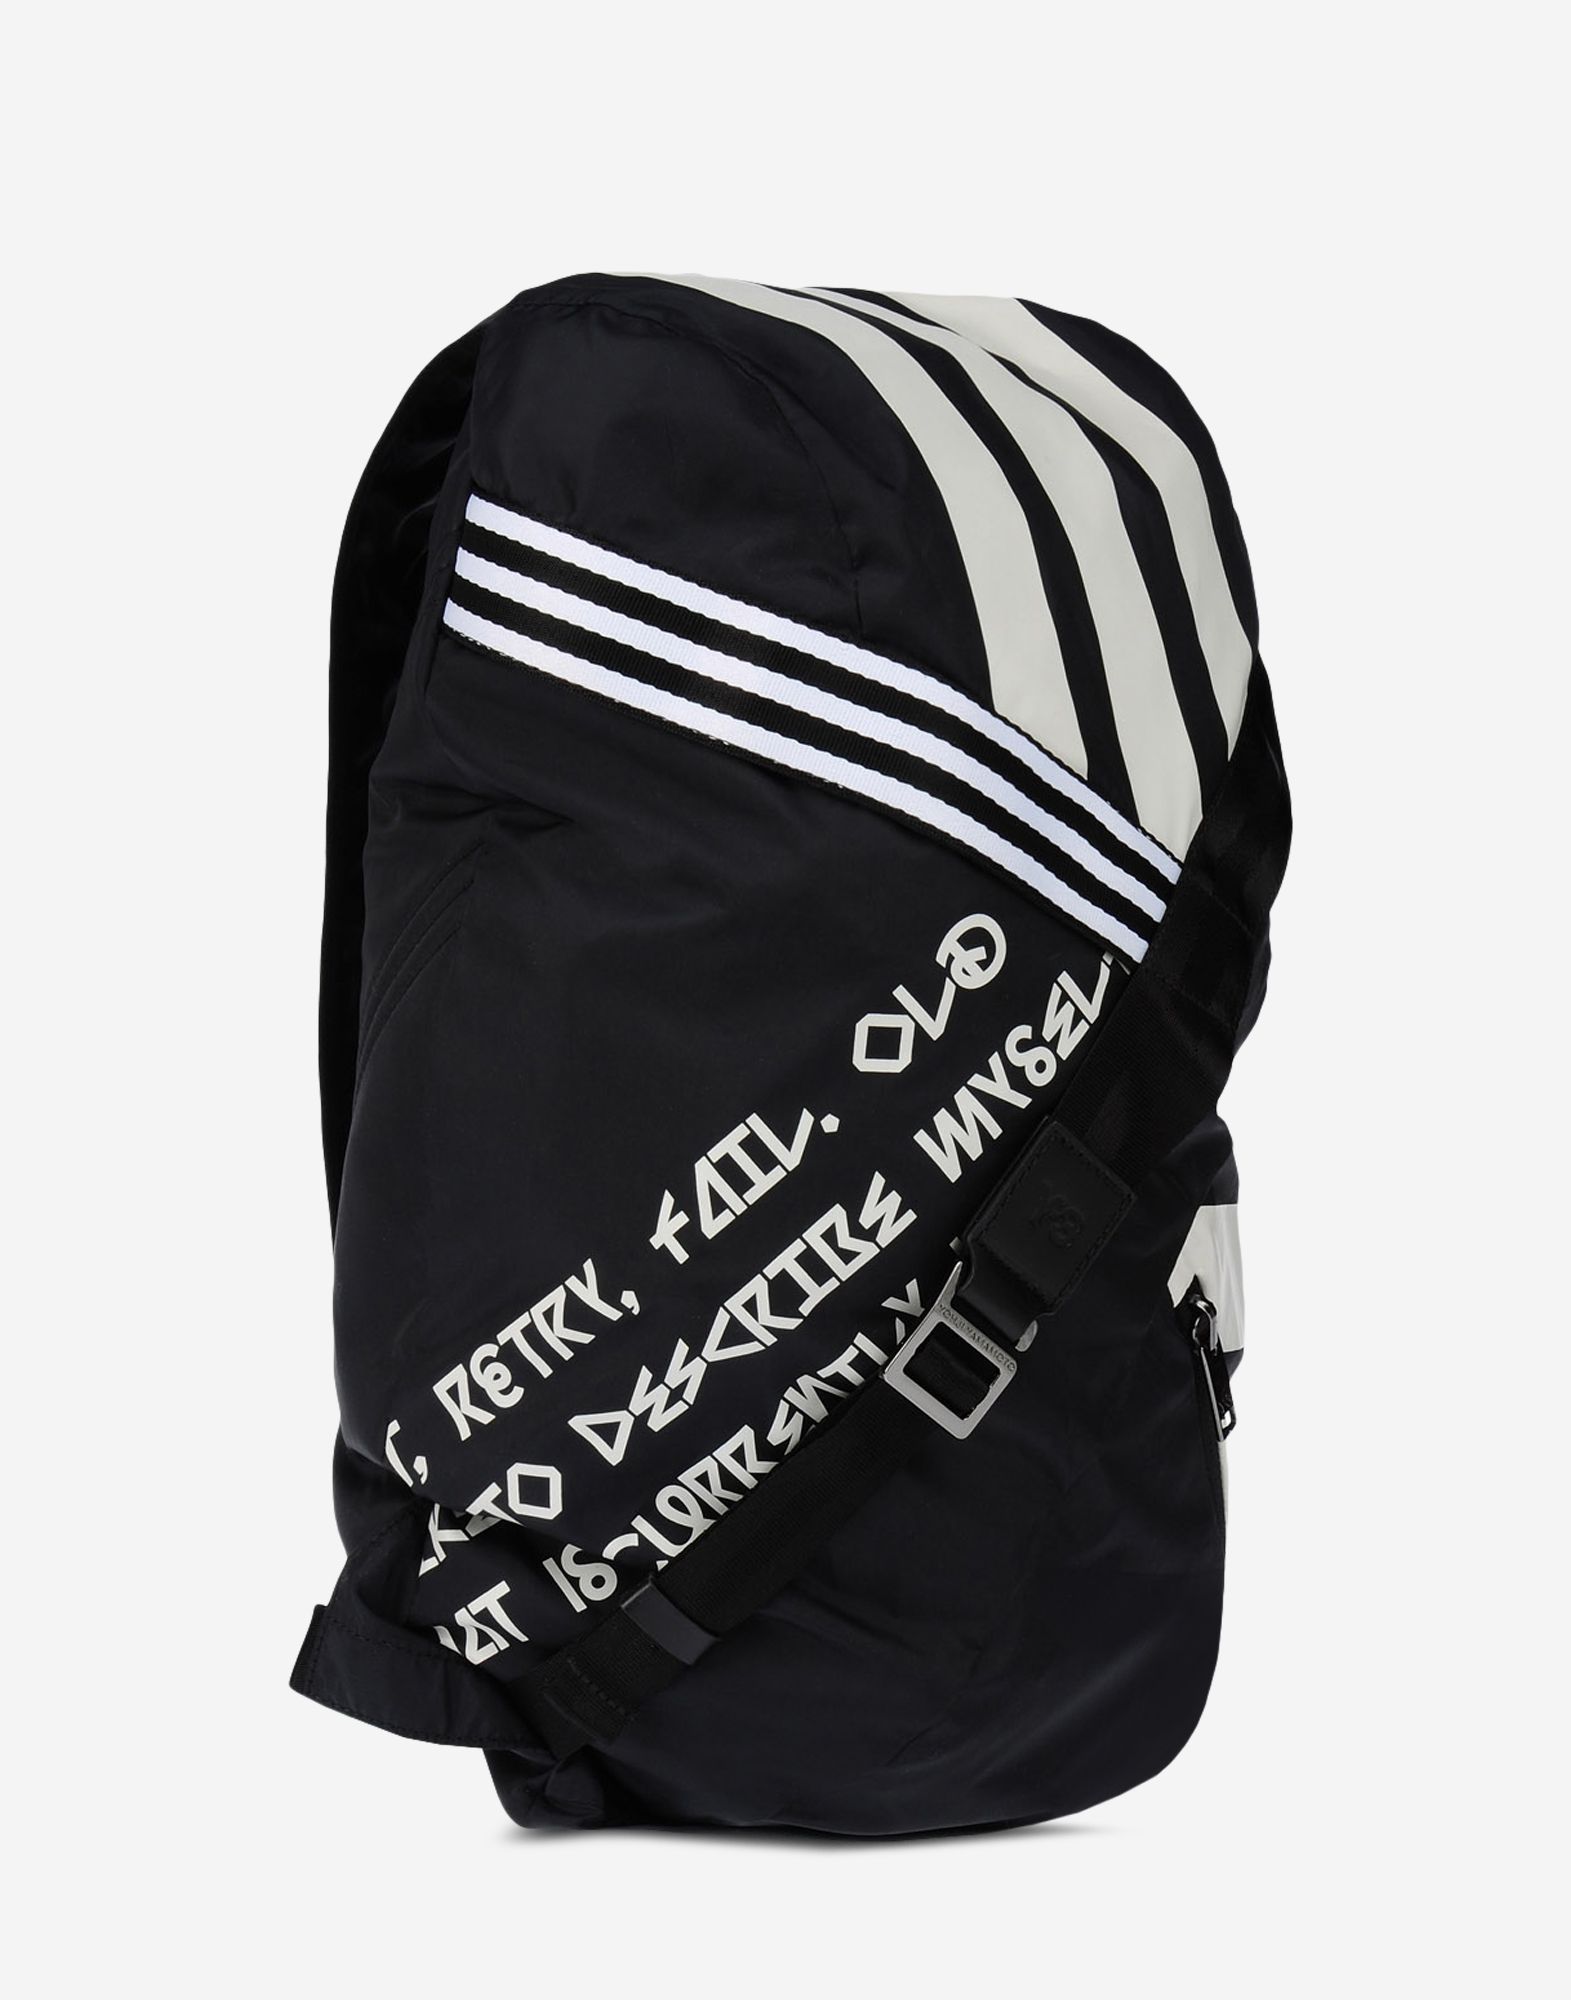 Y 3 FS Stripe Backpack for Men | Adidas Y-3 Official Store